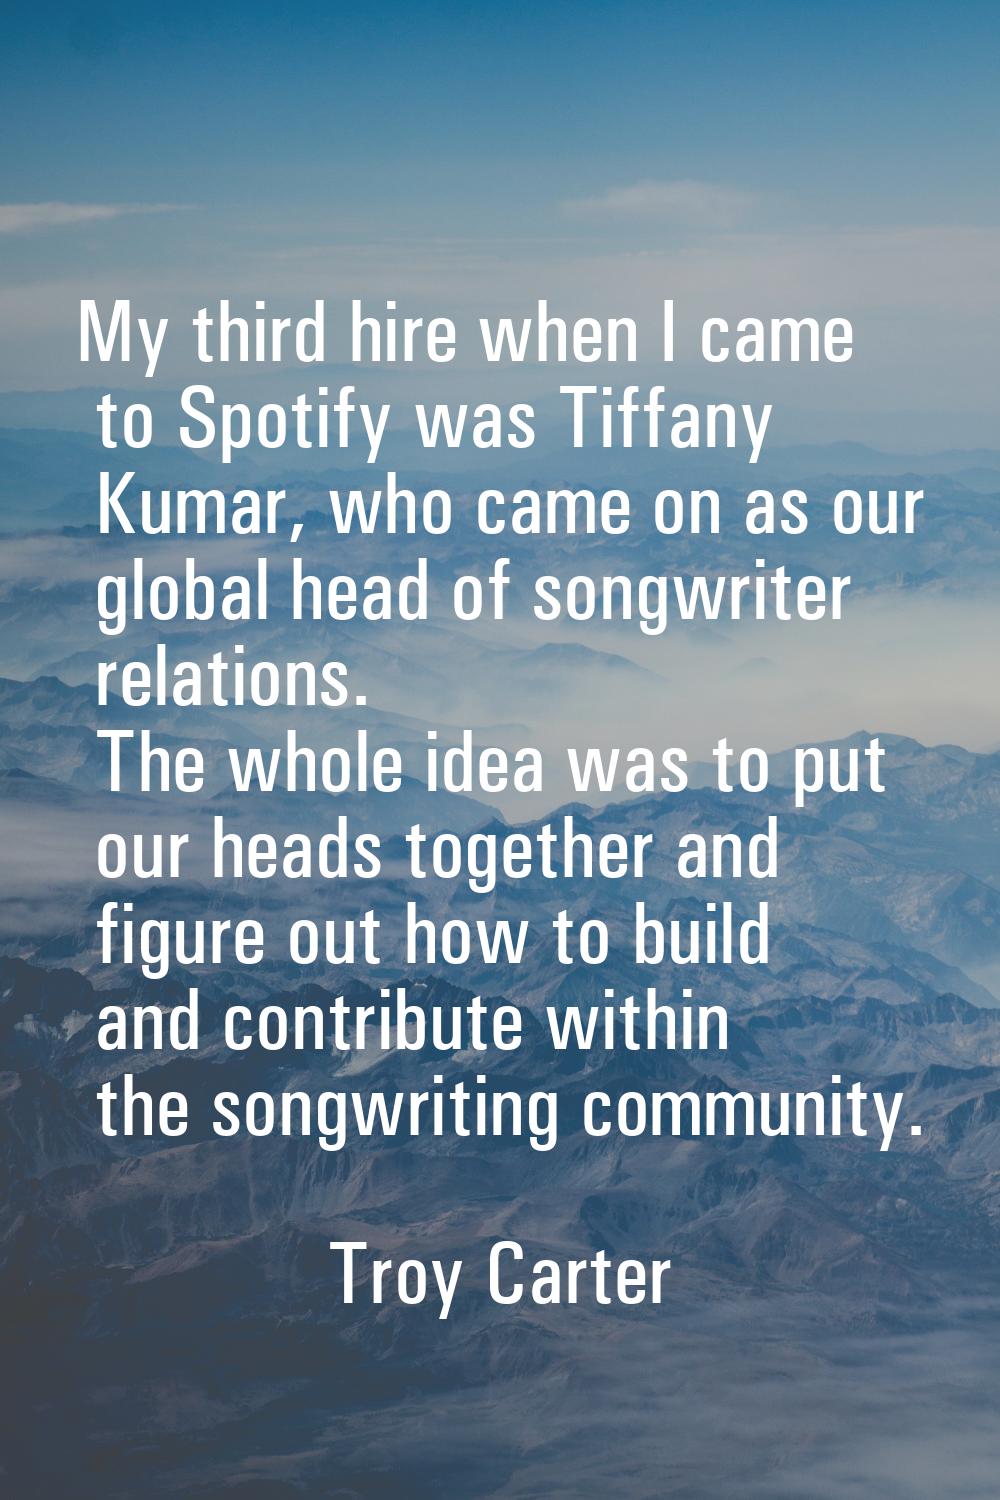 My third hire when I came to Spotify was Tiffany Kumar, who came on as our global head of songwrite